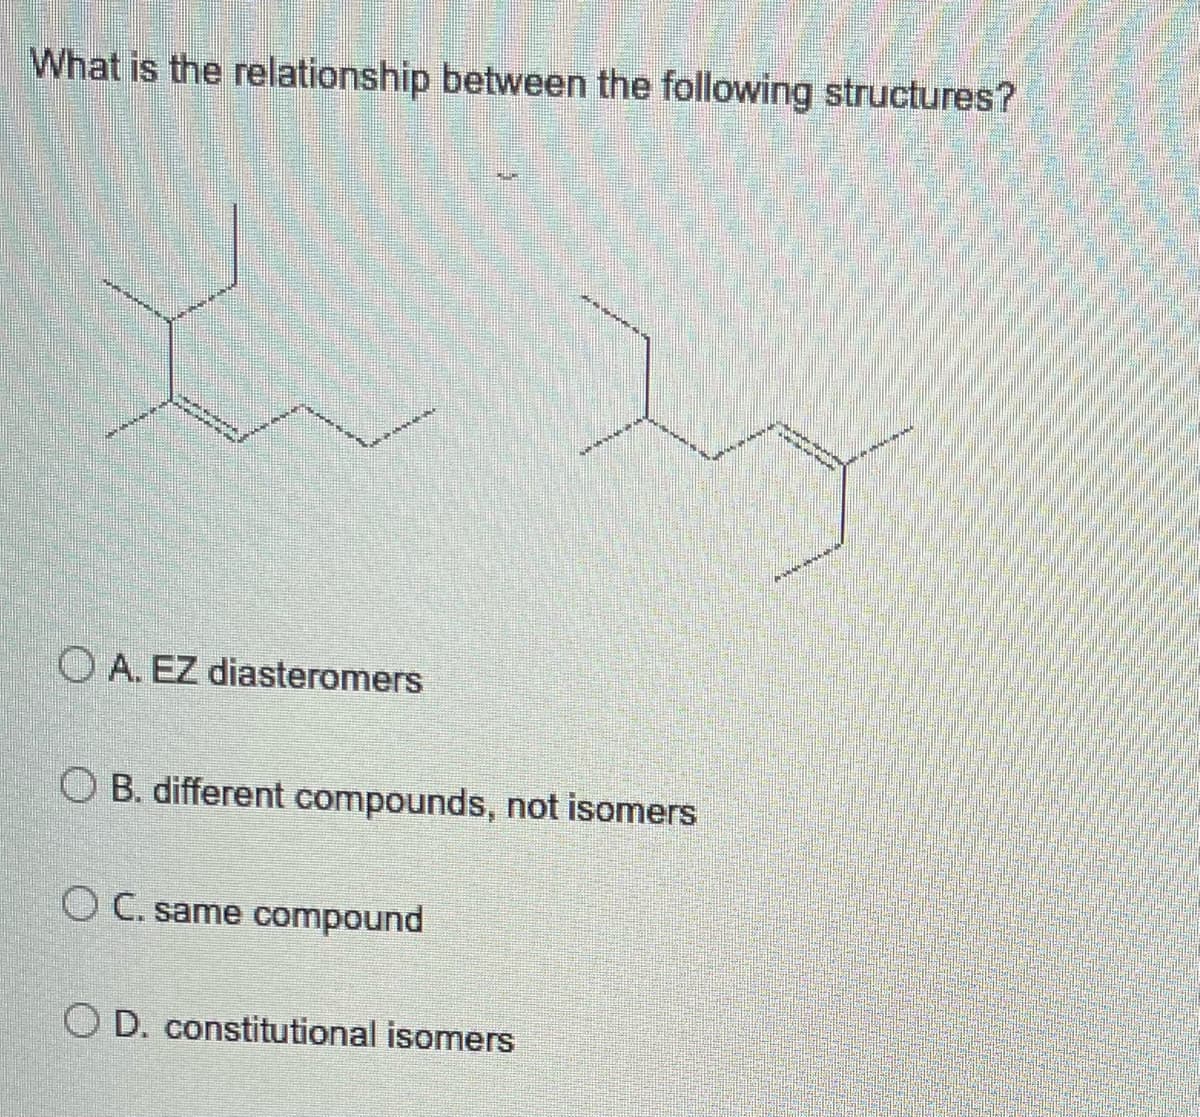 What is the relationship between the following structures?
********
A. EZ diasteromers
OB. different compounds, not isomers
OC. same compound
OD. constitutional isomers
wen
W